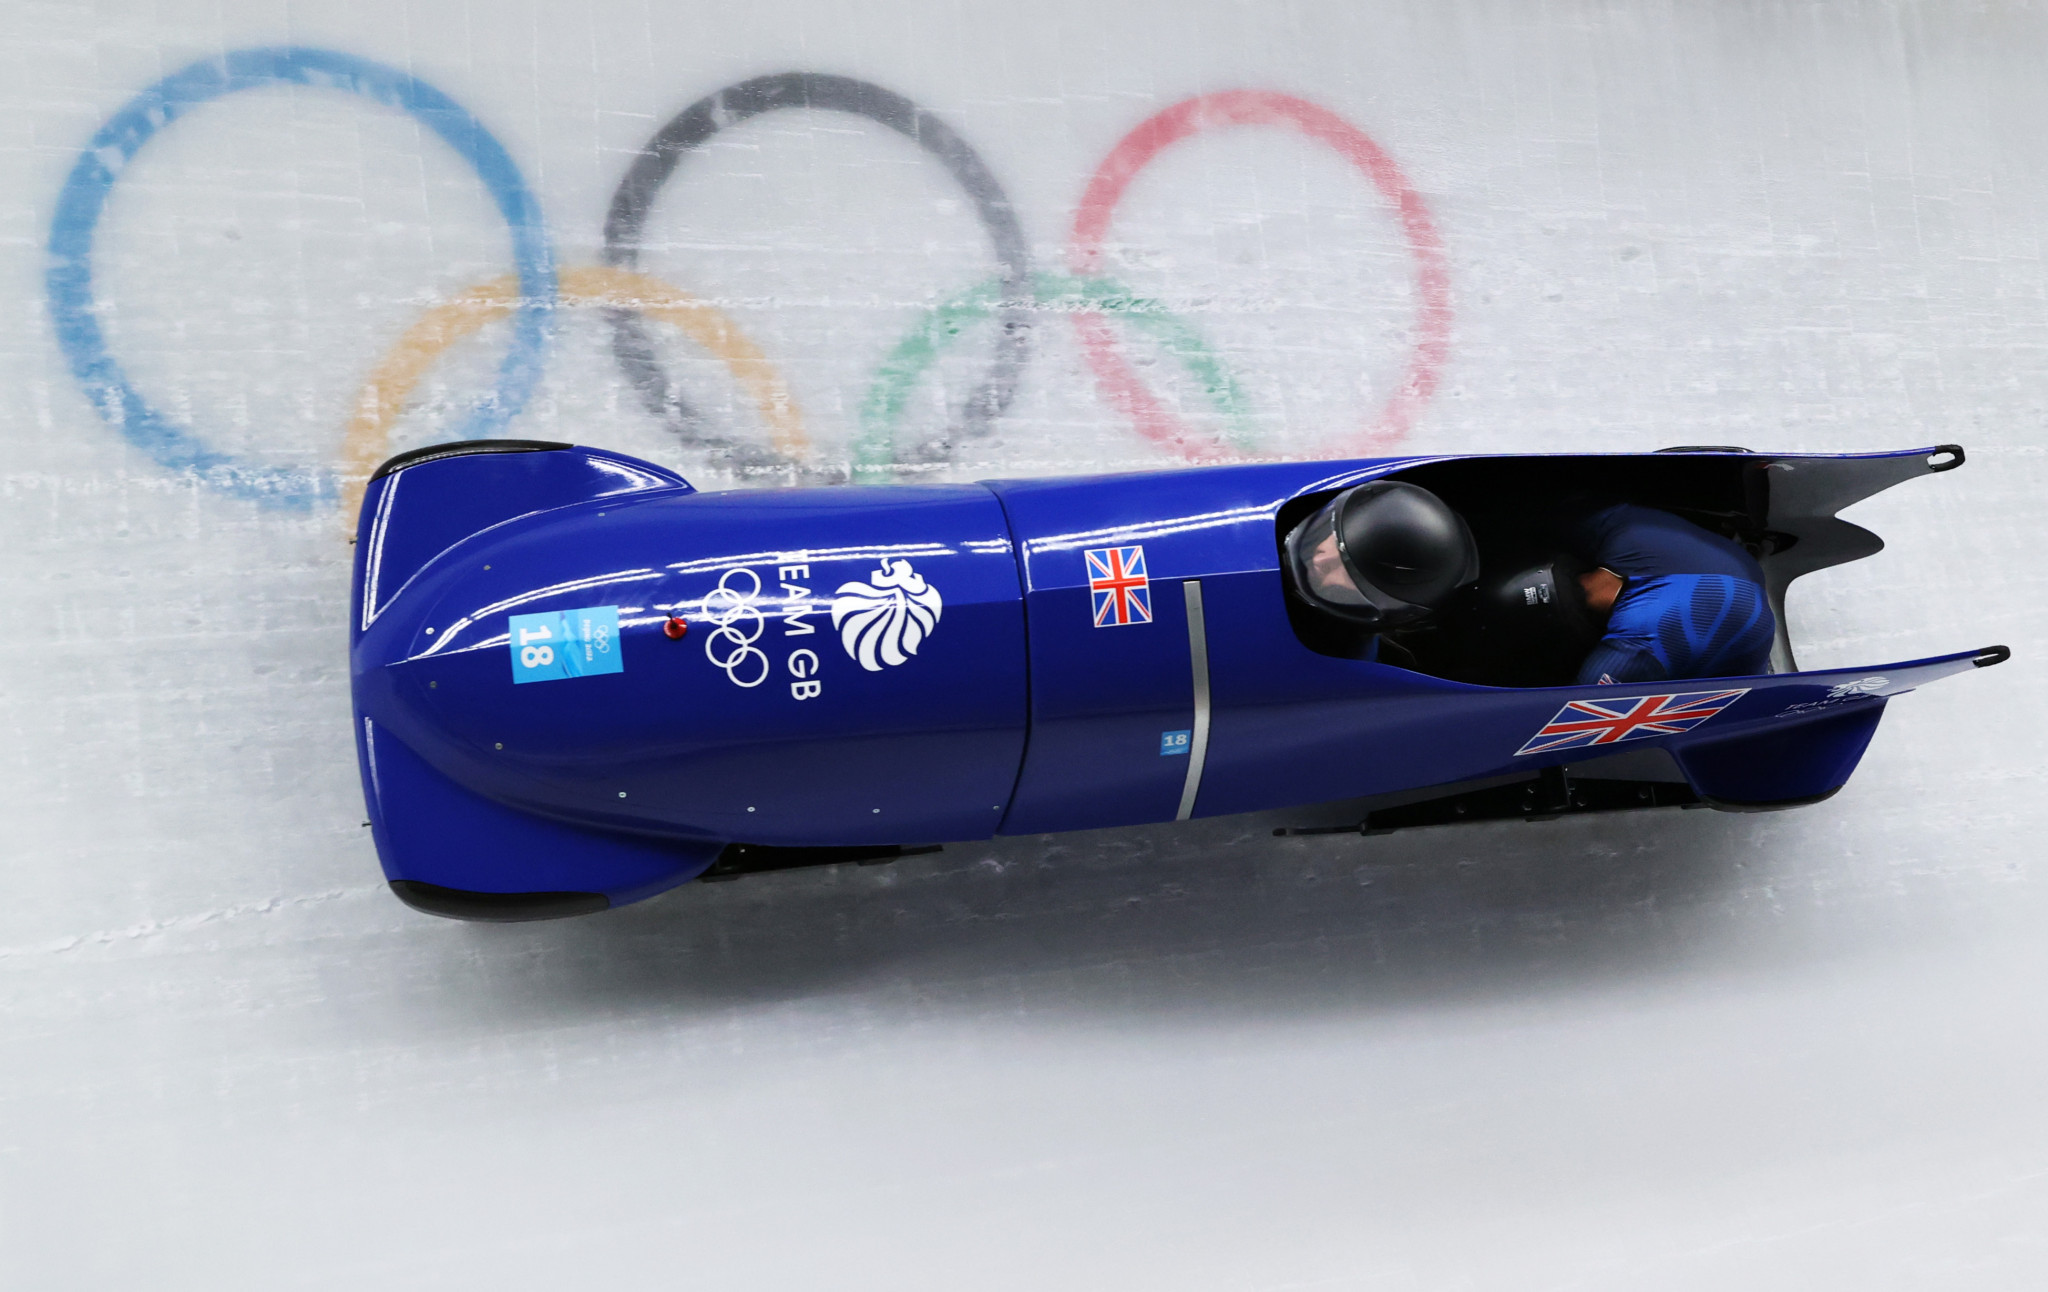 Silva and Richardson in British bobsleigh driving seats for Milan Cortina 2026 Olympic cycle